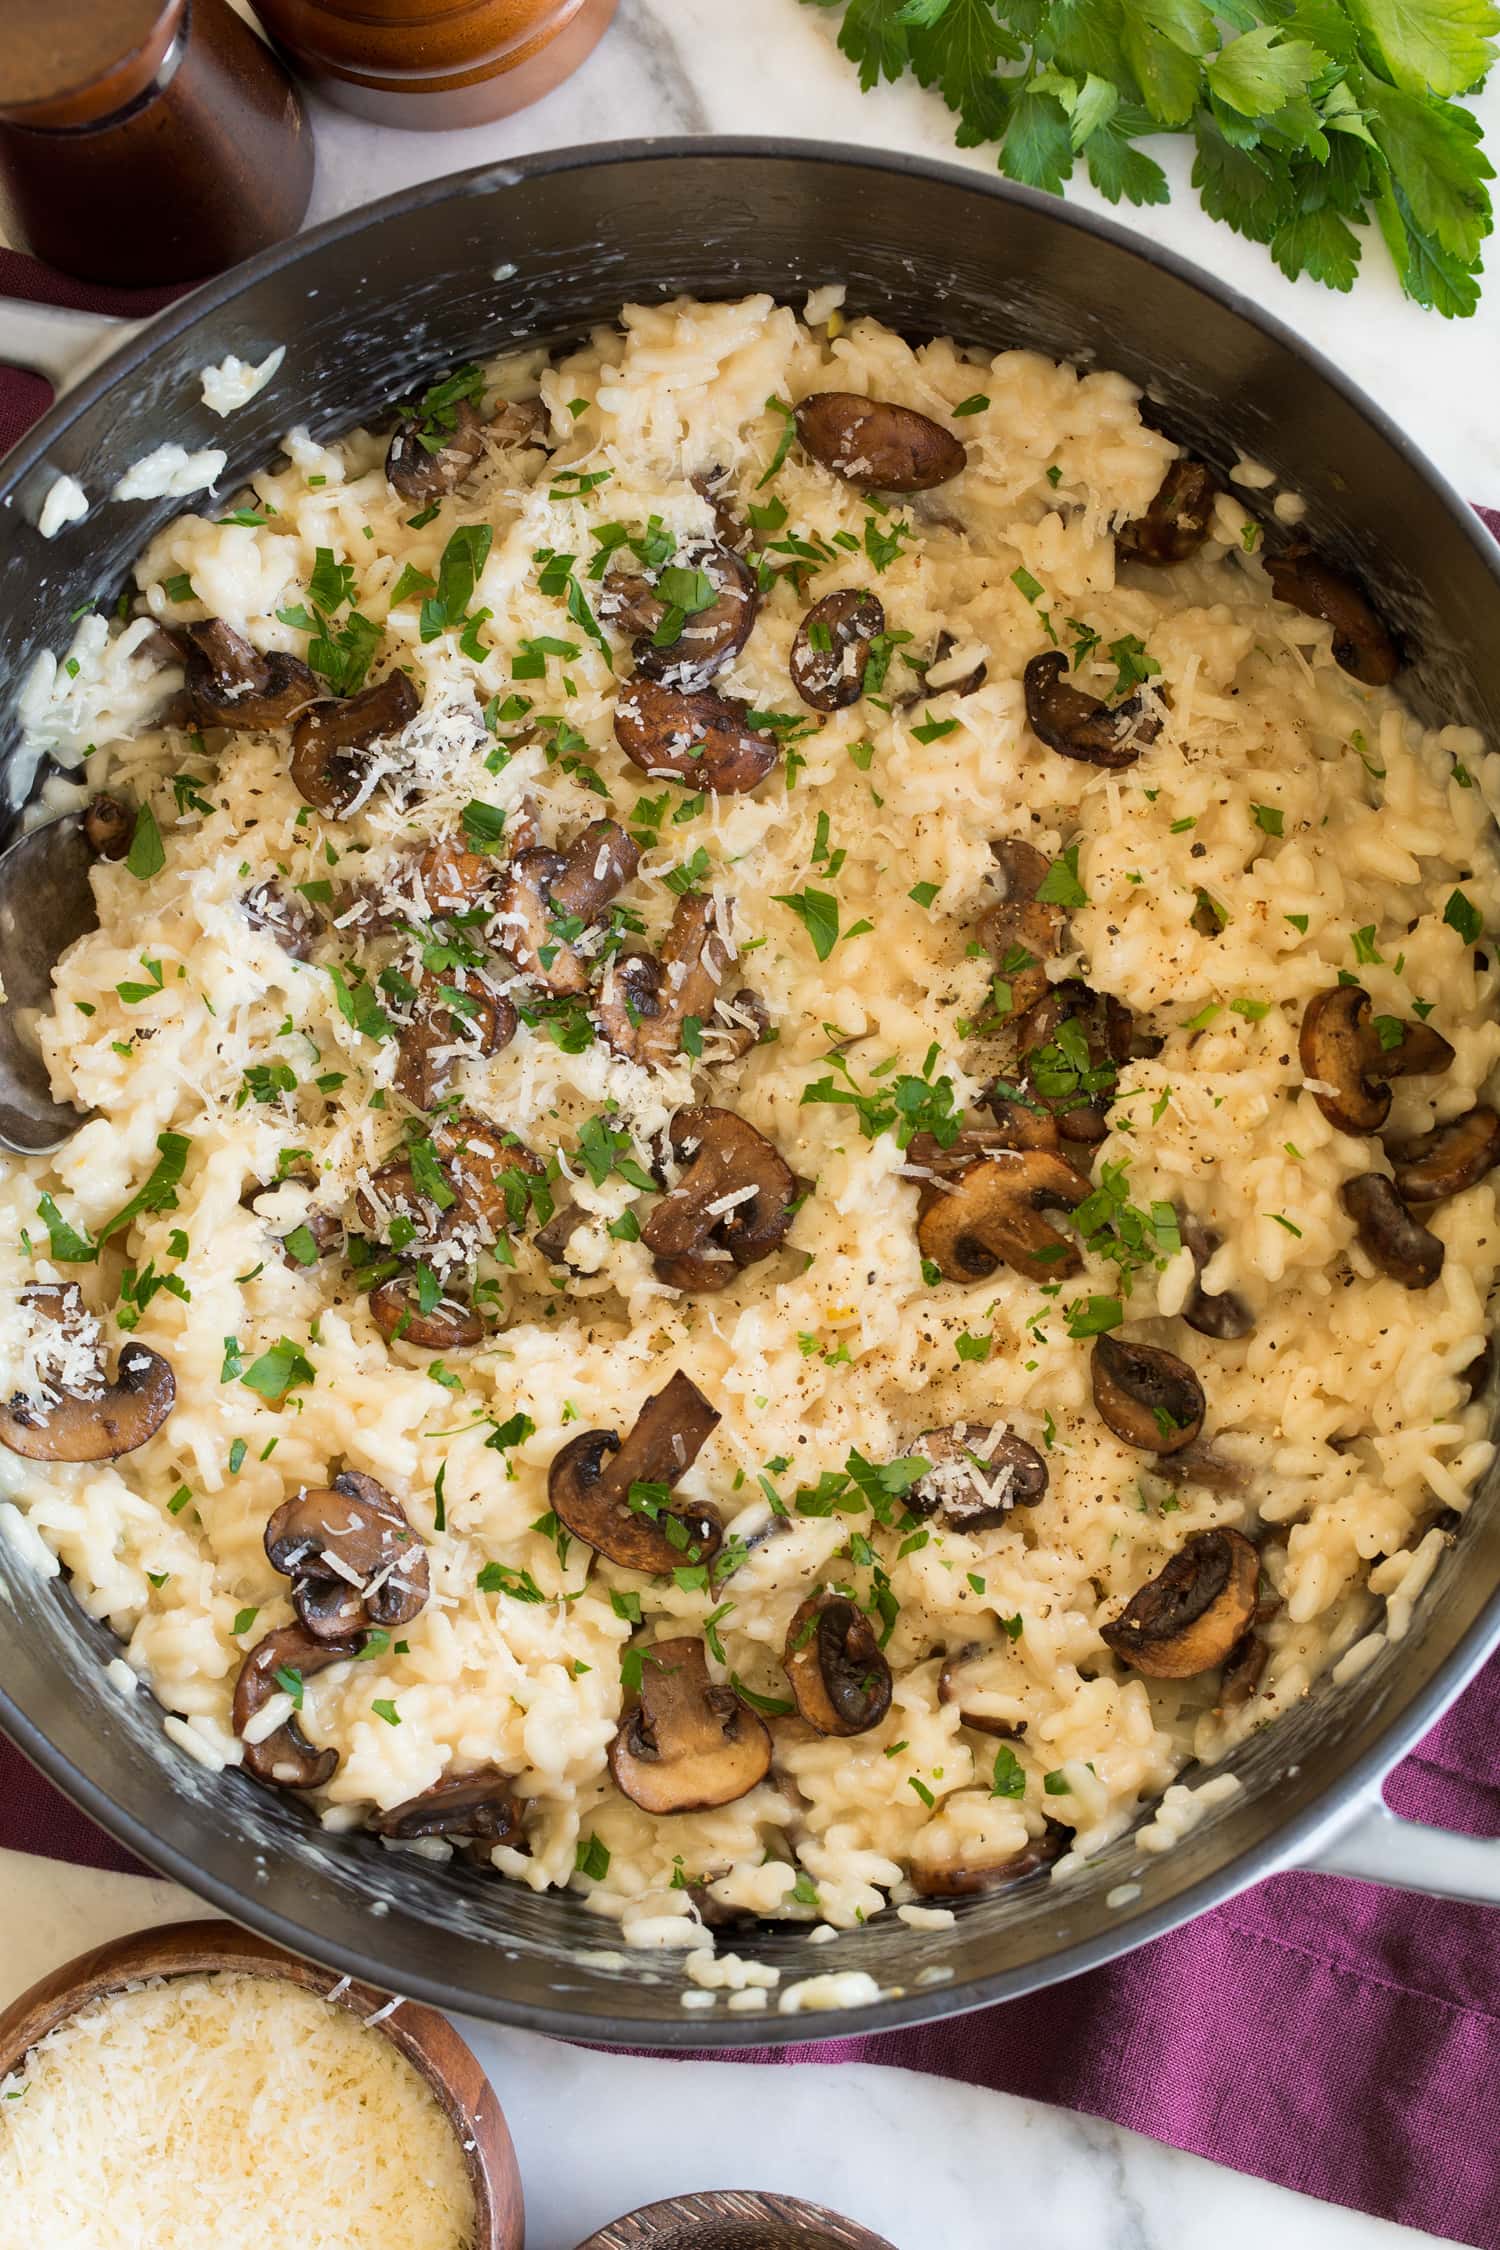 Risotto with white wine, mushrooms, parmesan and parsley.